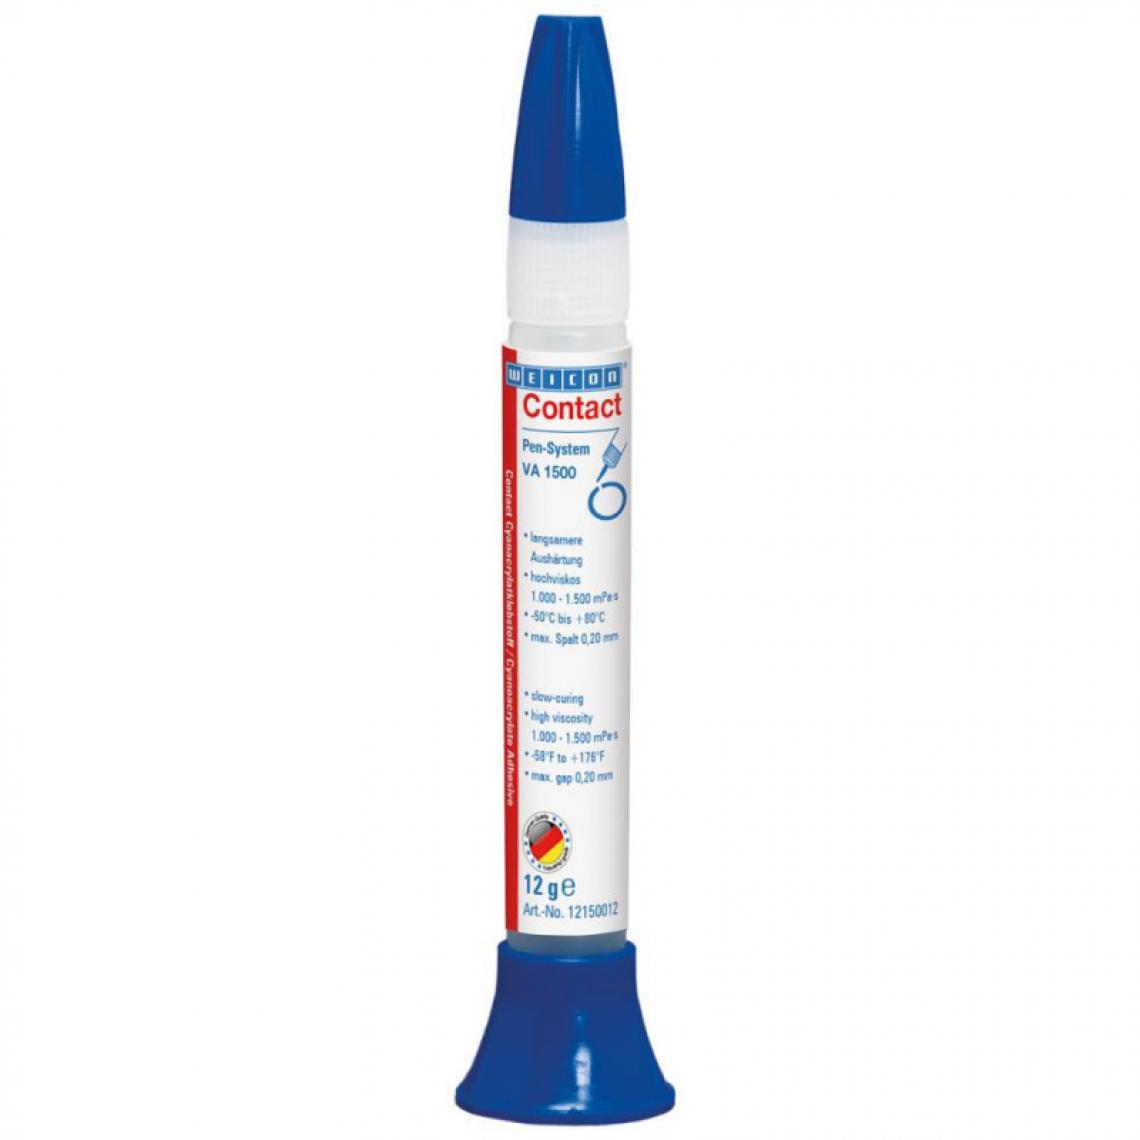 marque generique - Colle cyanoacrylate VA 1500 12 g Pen-System Weicon (Par 30) - Mastic, silicone, joint